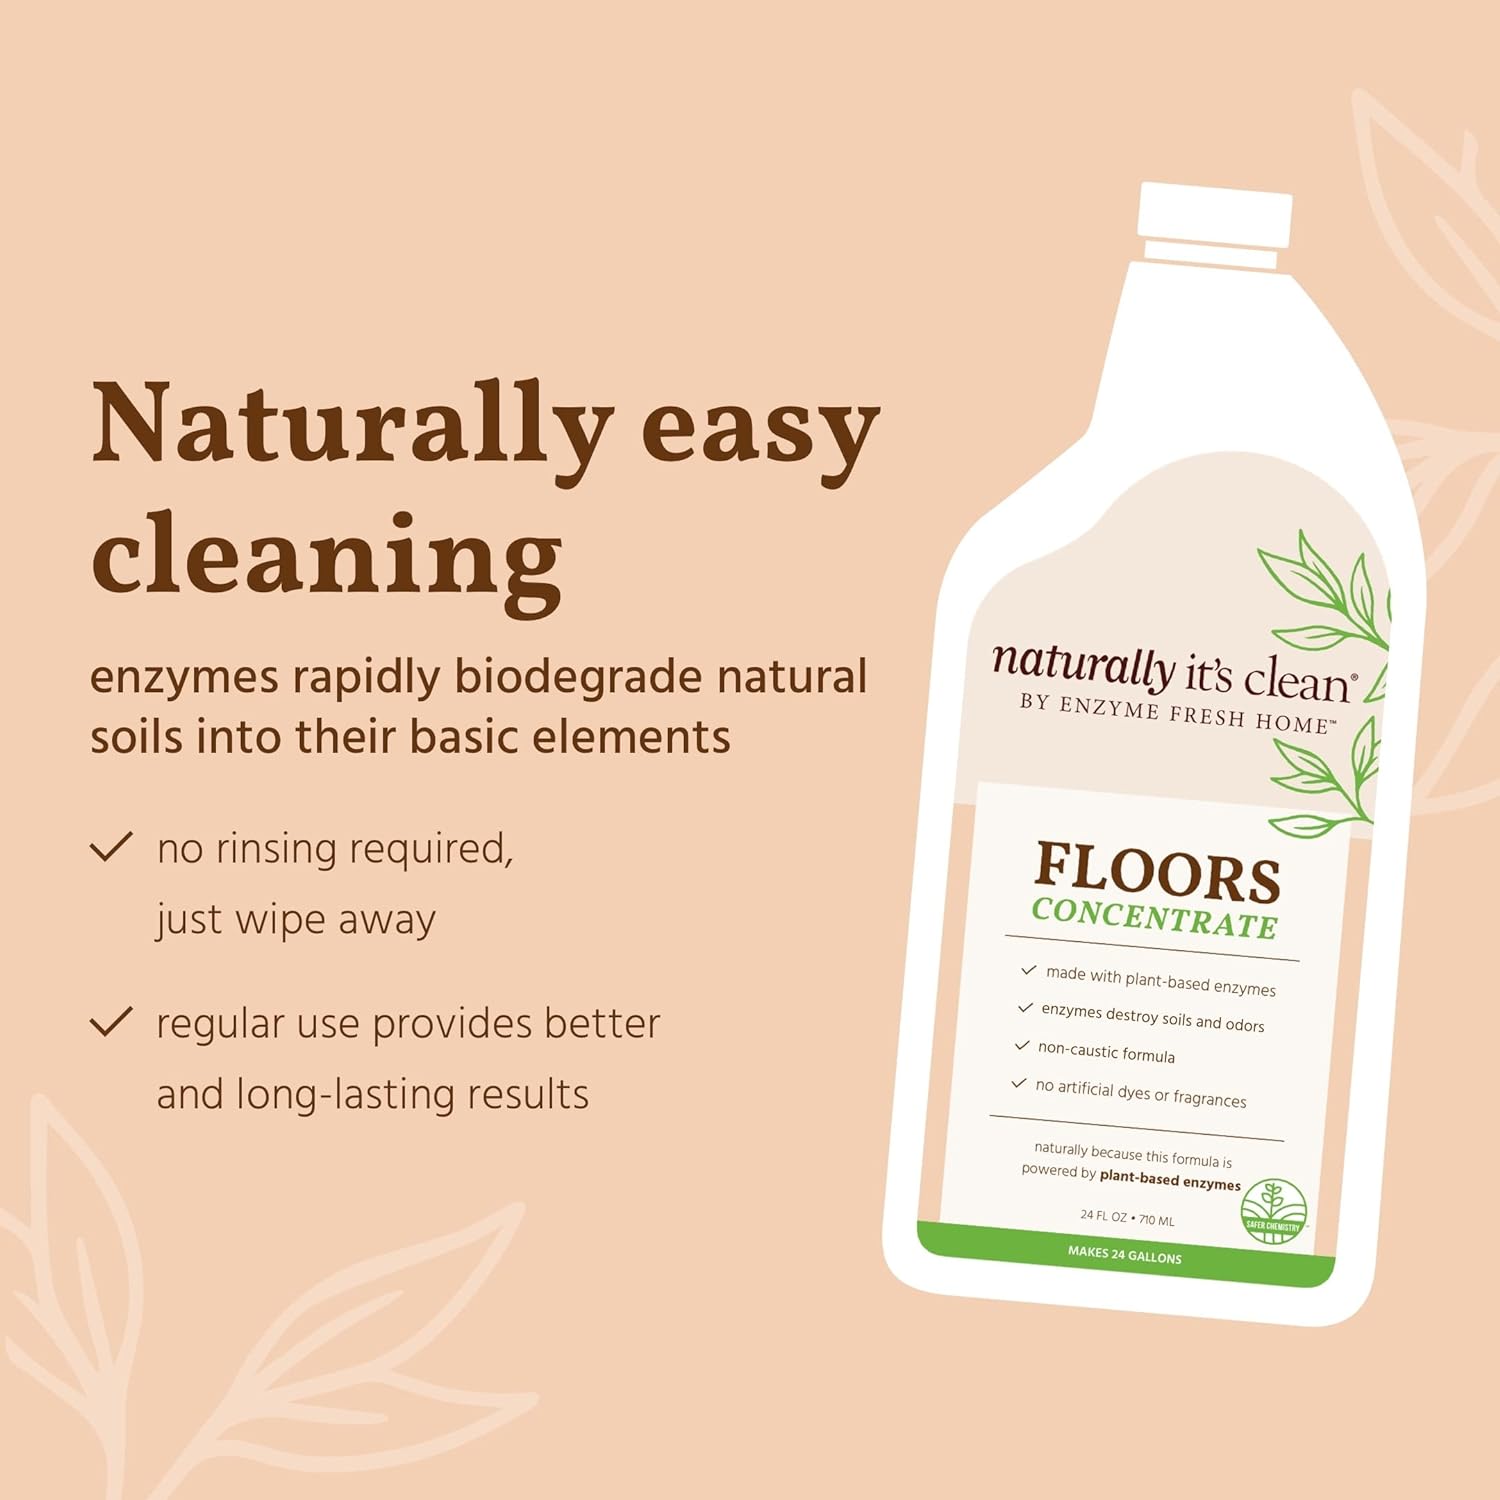 Floor Cleaner Concentrate